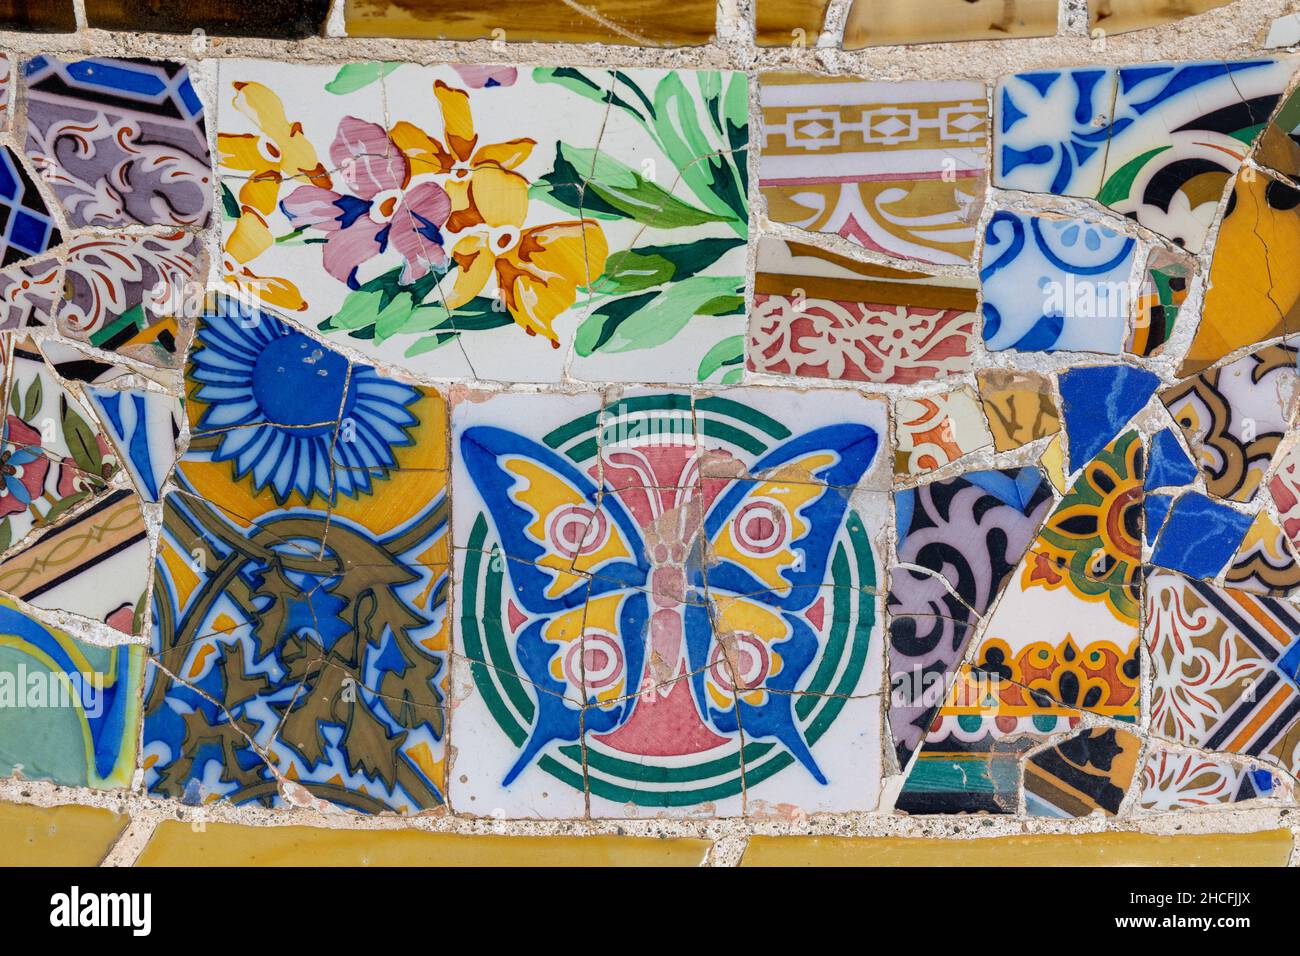 Gaudi colorful and emblematic mosaic work on the main terrace of the Park Guell, Barcelona Stock Photo